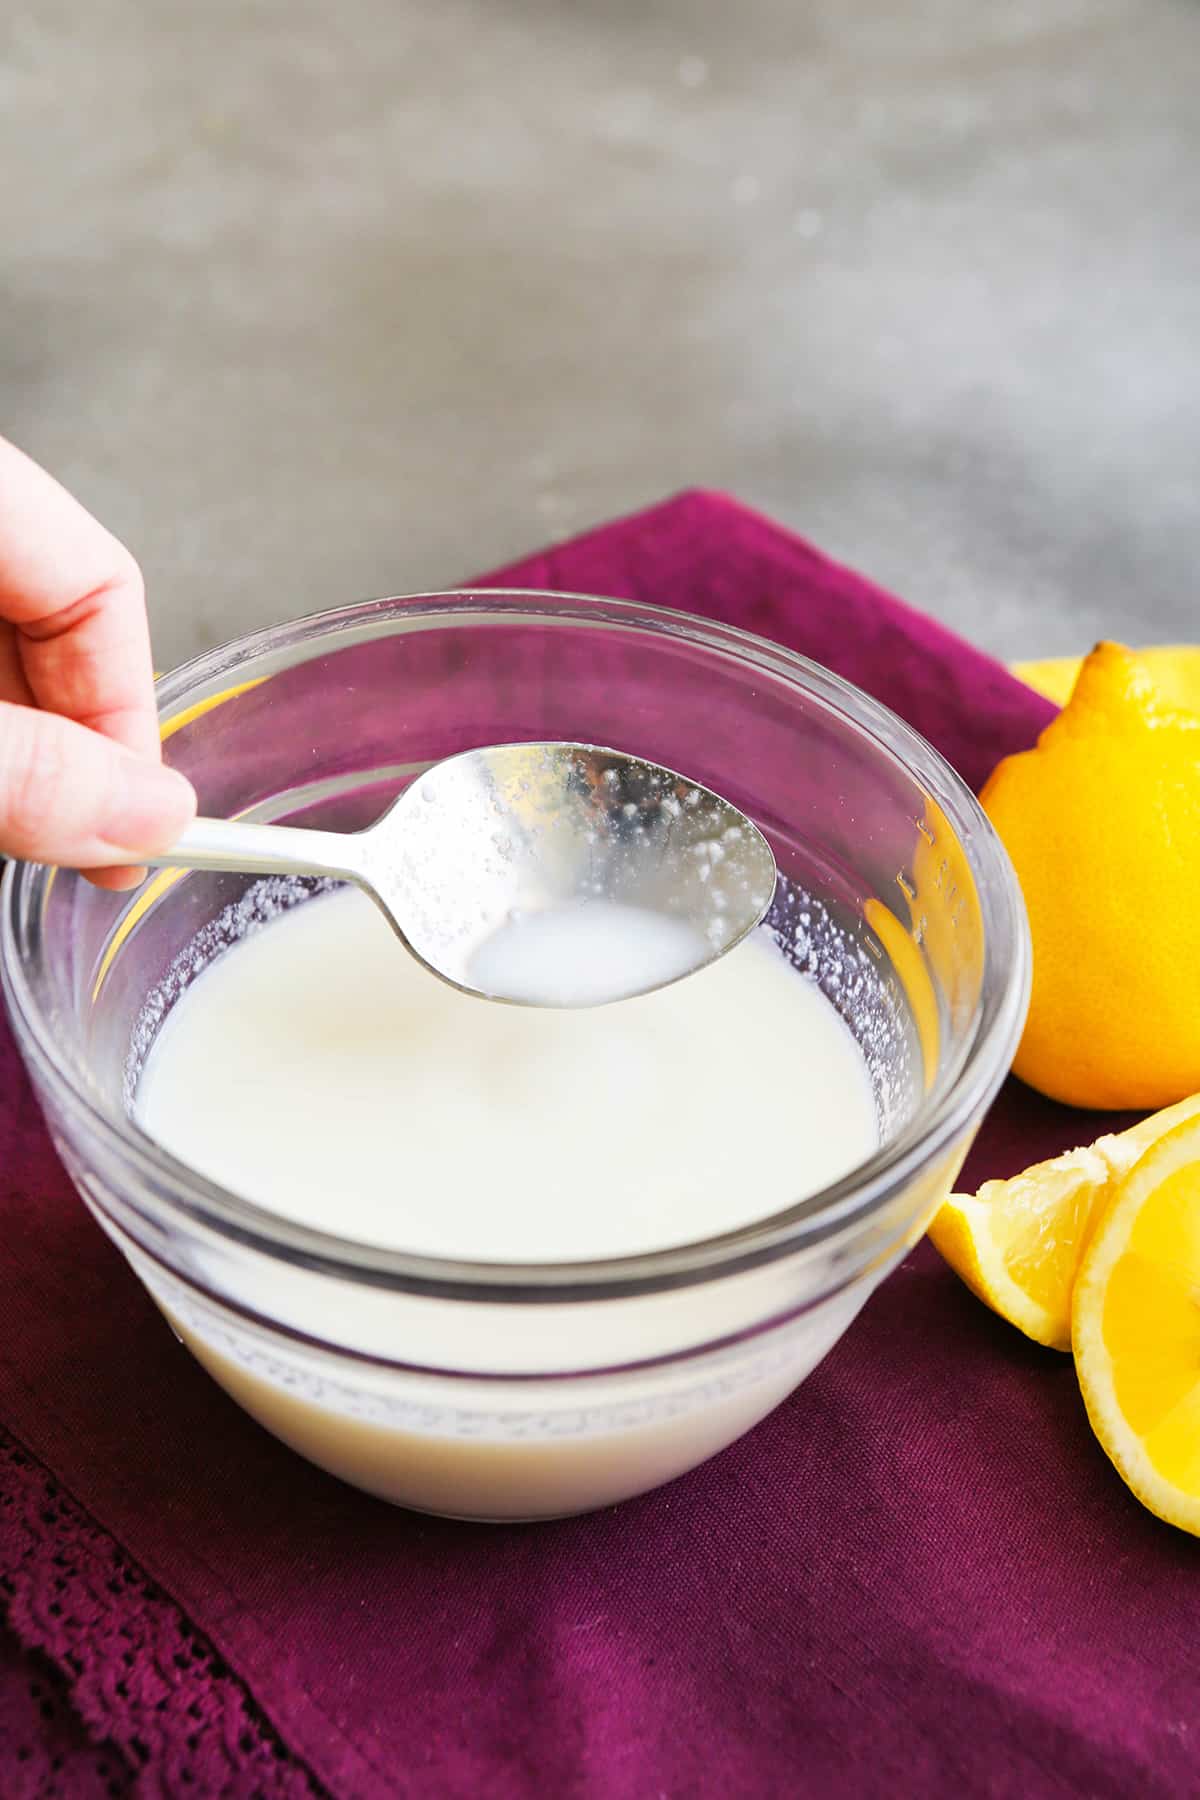 A spoon drizzling slightly chunky buttermilk into a bowl, sitting next to a lemon.